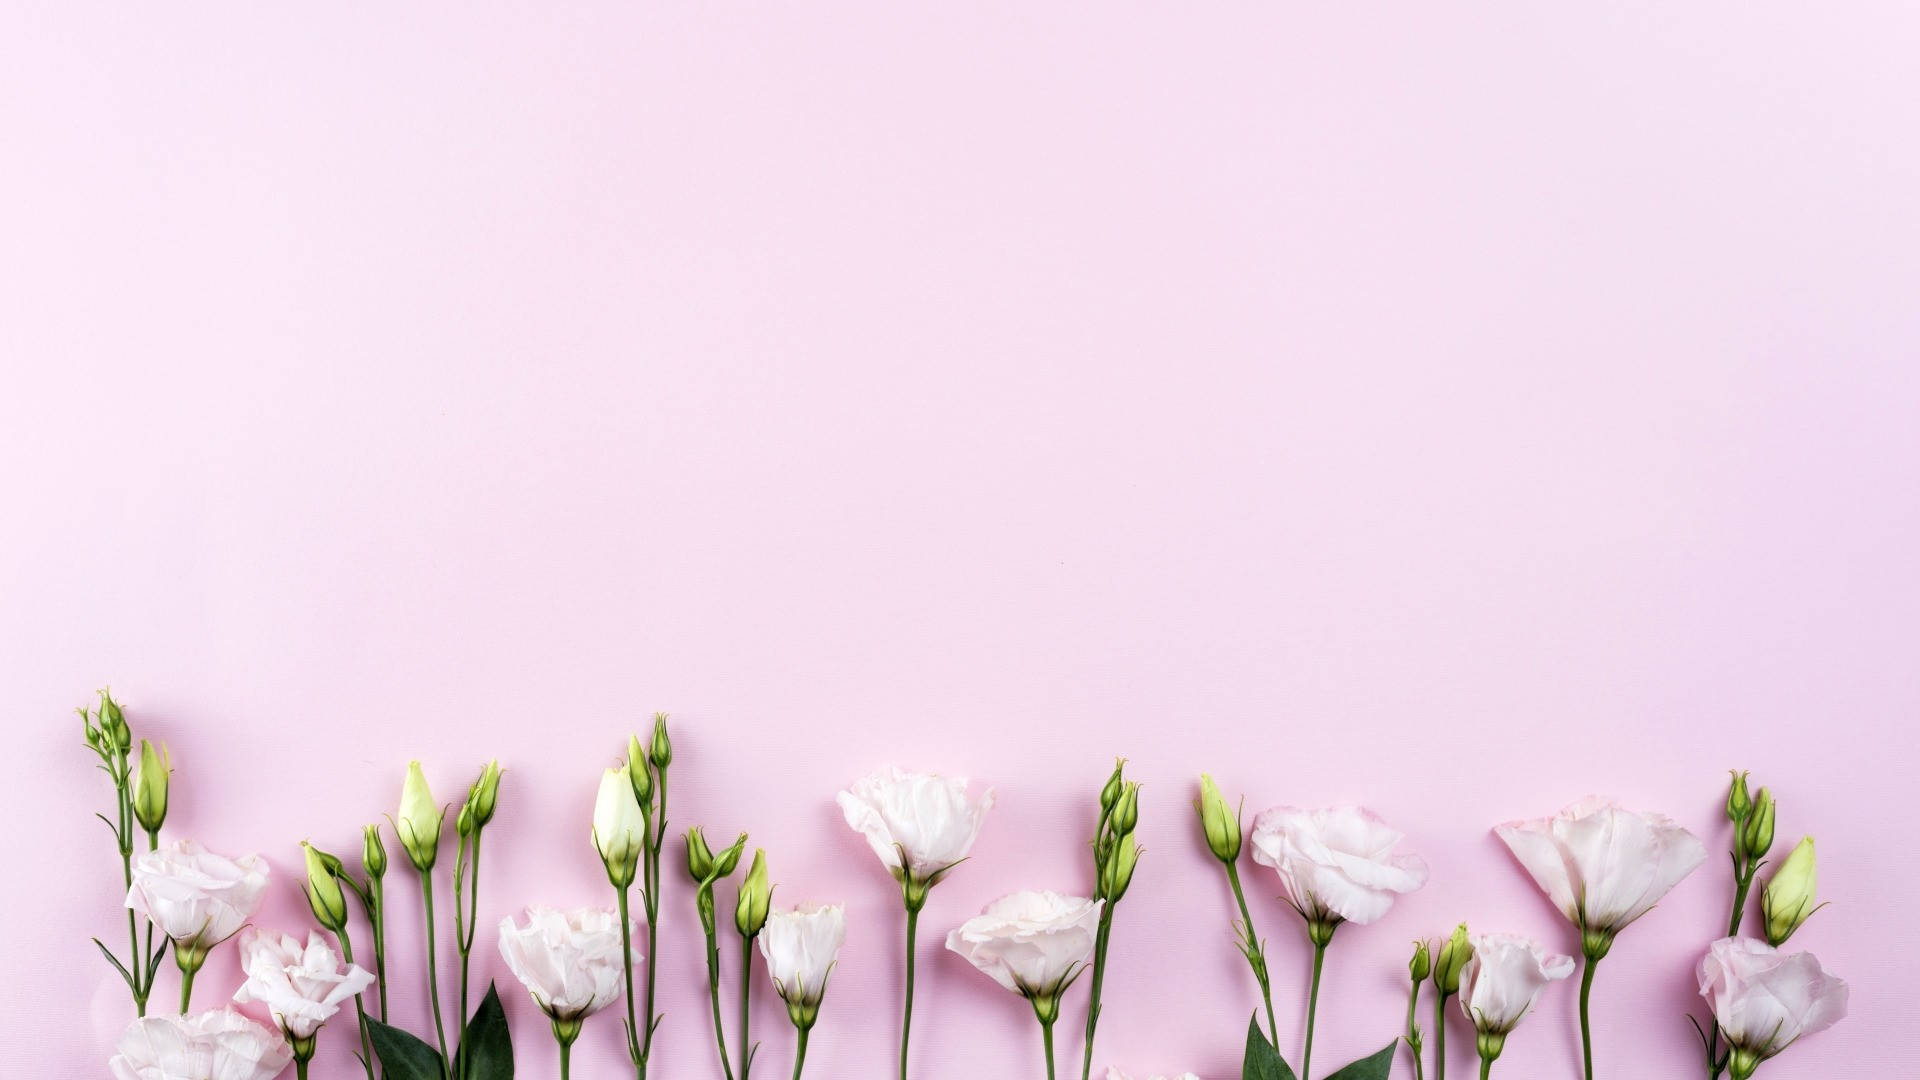 “Discover the beauty of spring with a minimalist approach.” Wallpaper